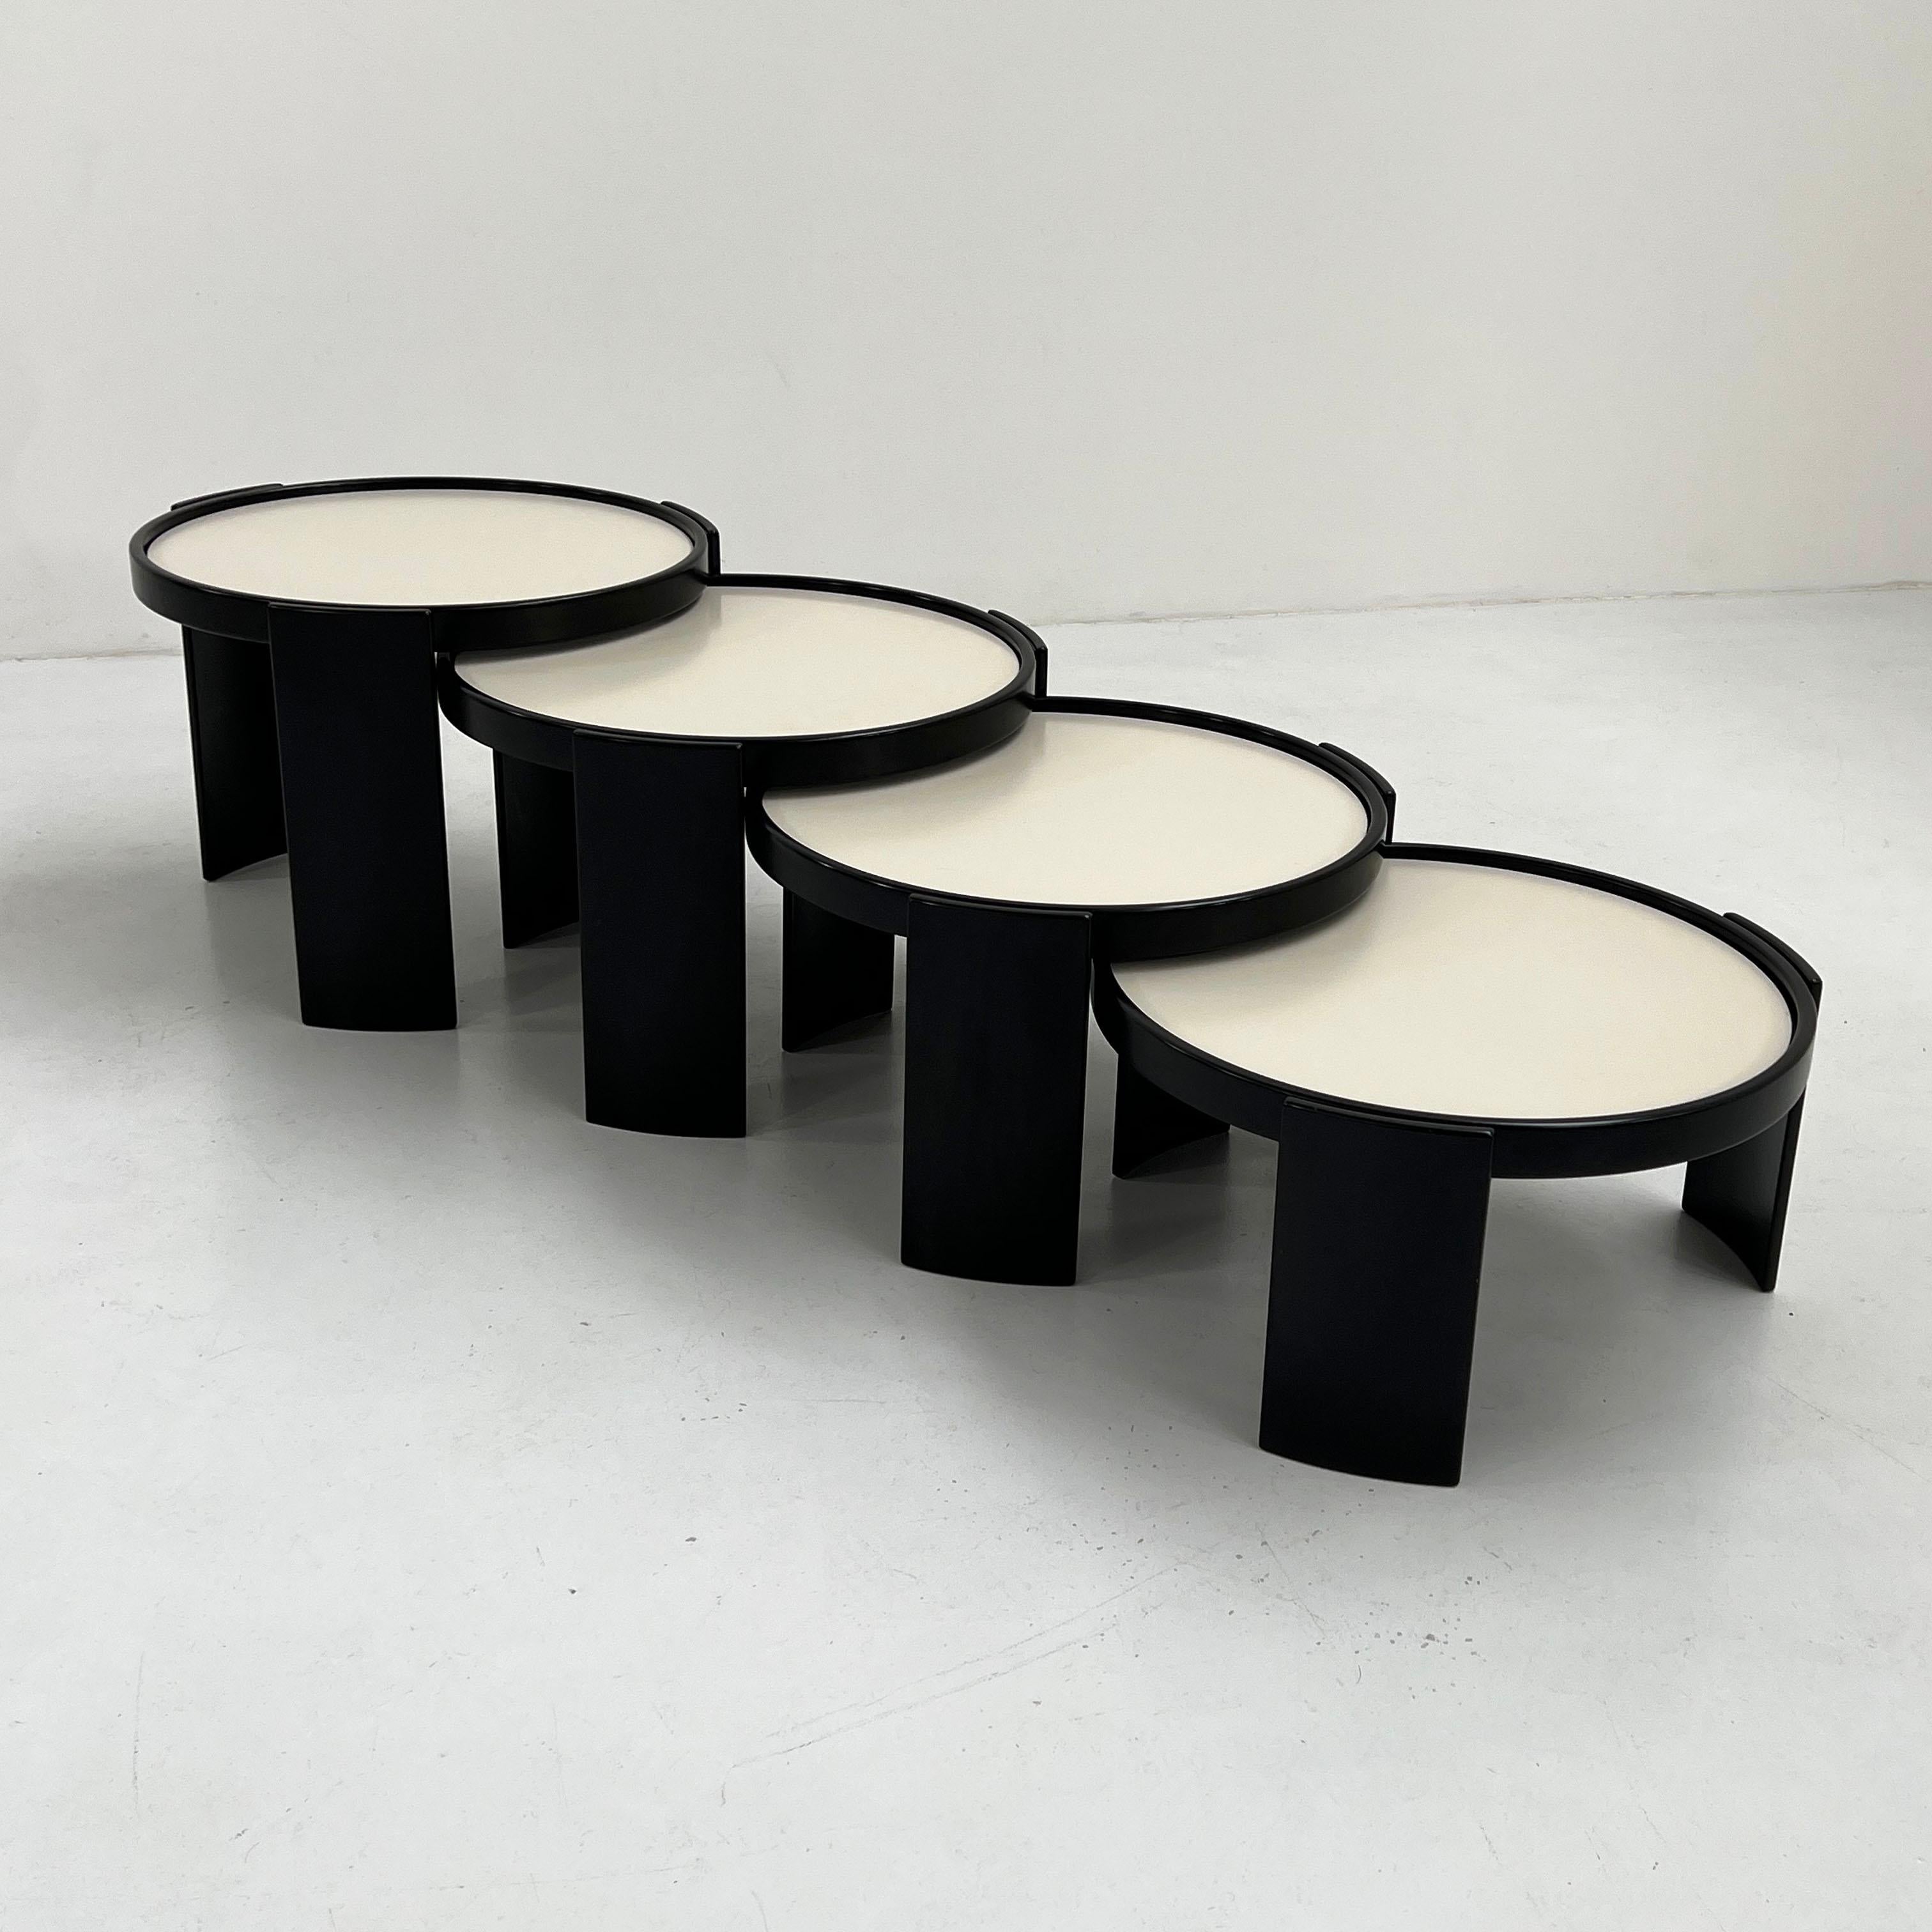 Italian Set of Large Reversible Nesting Tables by Gianfranco Frattini for Cassina, 1960s For Sale